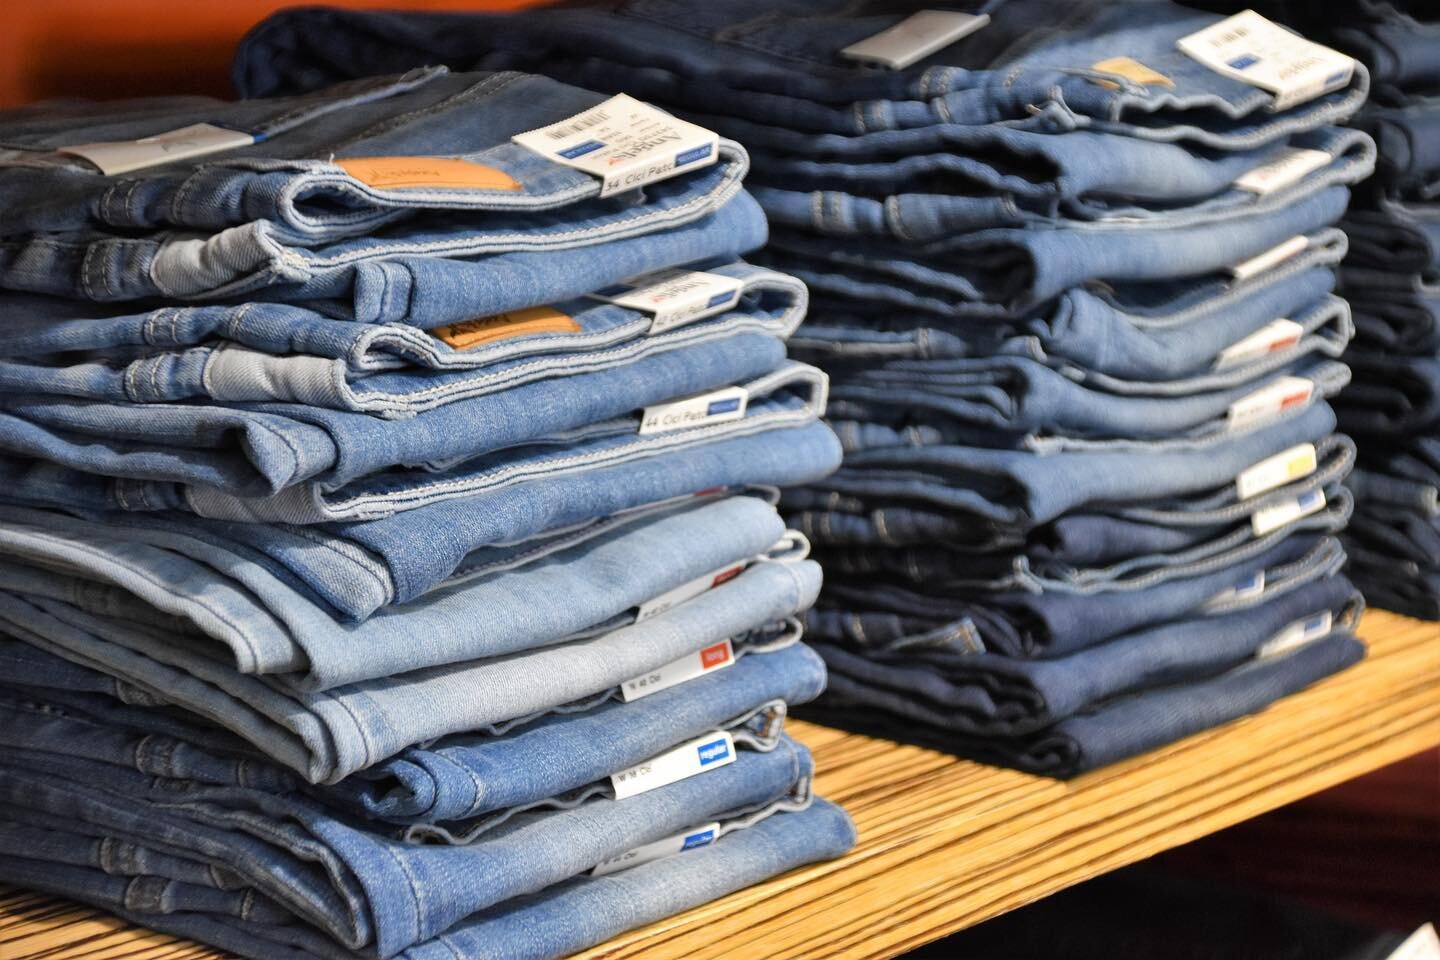 A lot of us might be guilty of hoarding jeans in our closets. But are you aware of how your favorite jeans are made? 👖👖 It takes approximately 2900 gallons of water to make one pair of traditional cotton jeans. 😣⠀
⠀
As we strive to live a more sus